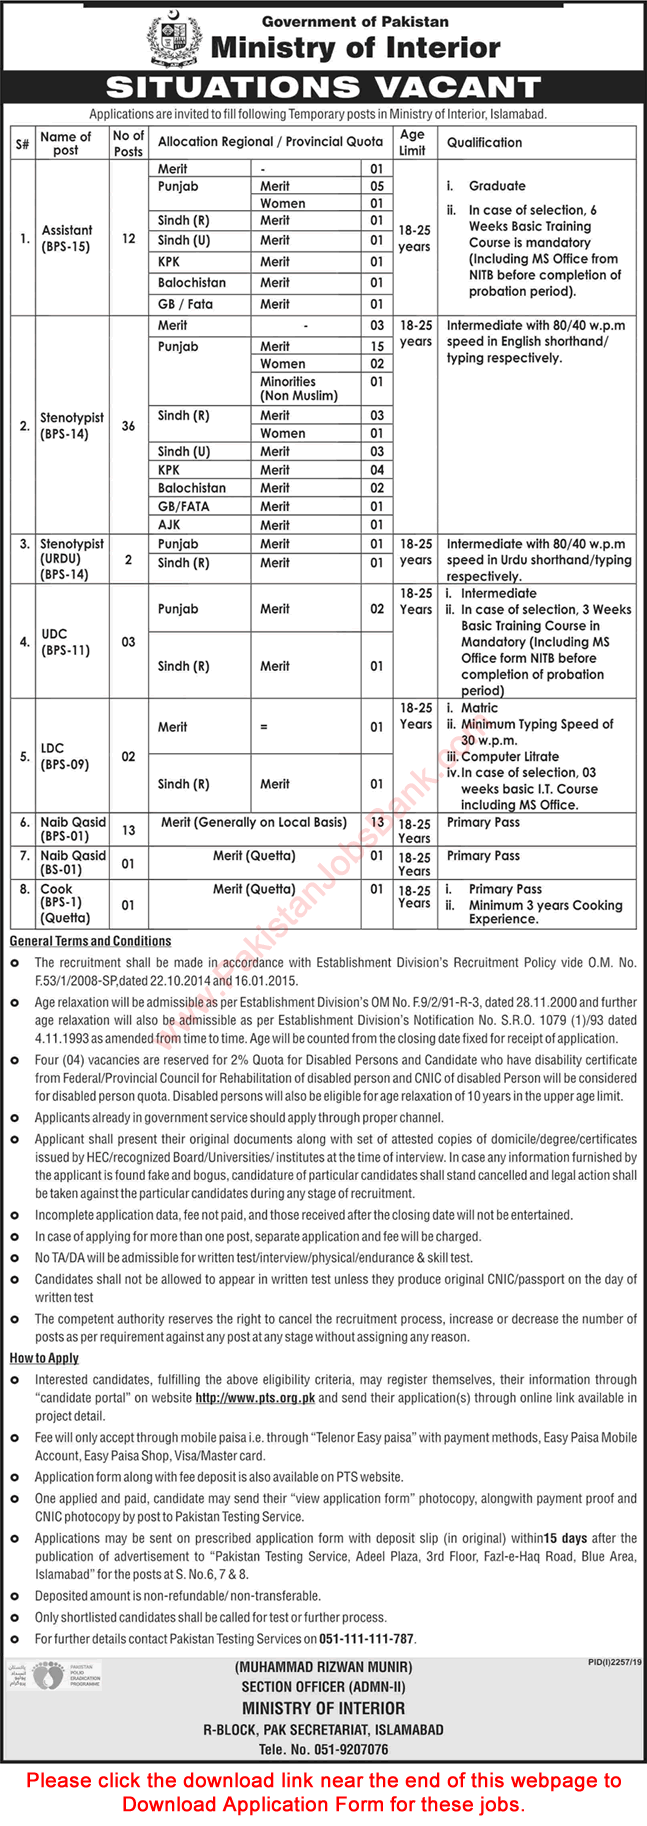 Ministry of Interior Islamabad Jobs October 2019 November PTS Application Form Stenotypists, Assistants & Others Latest